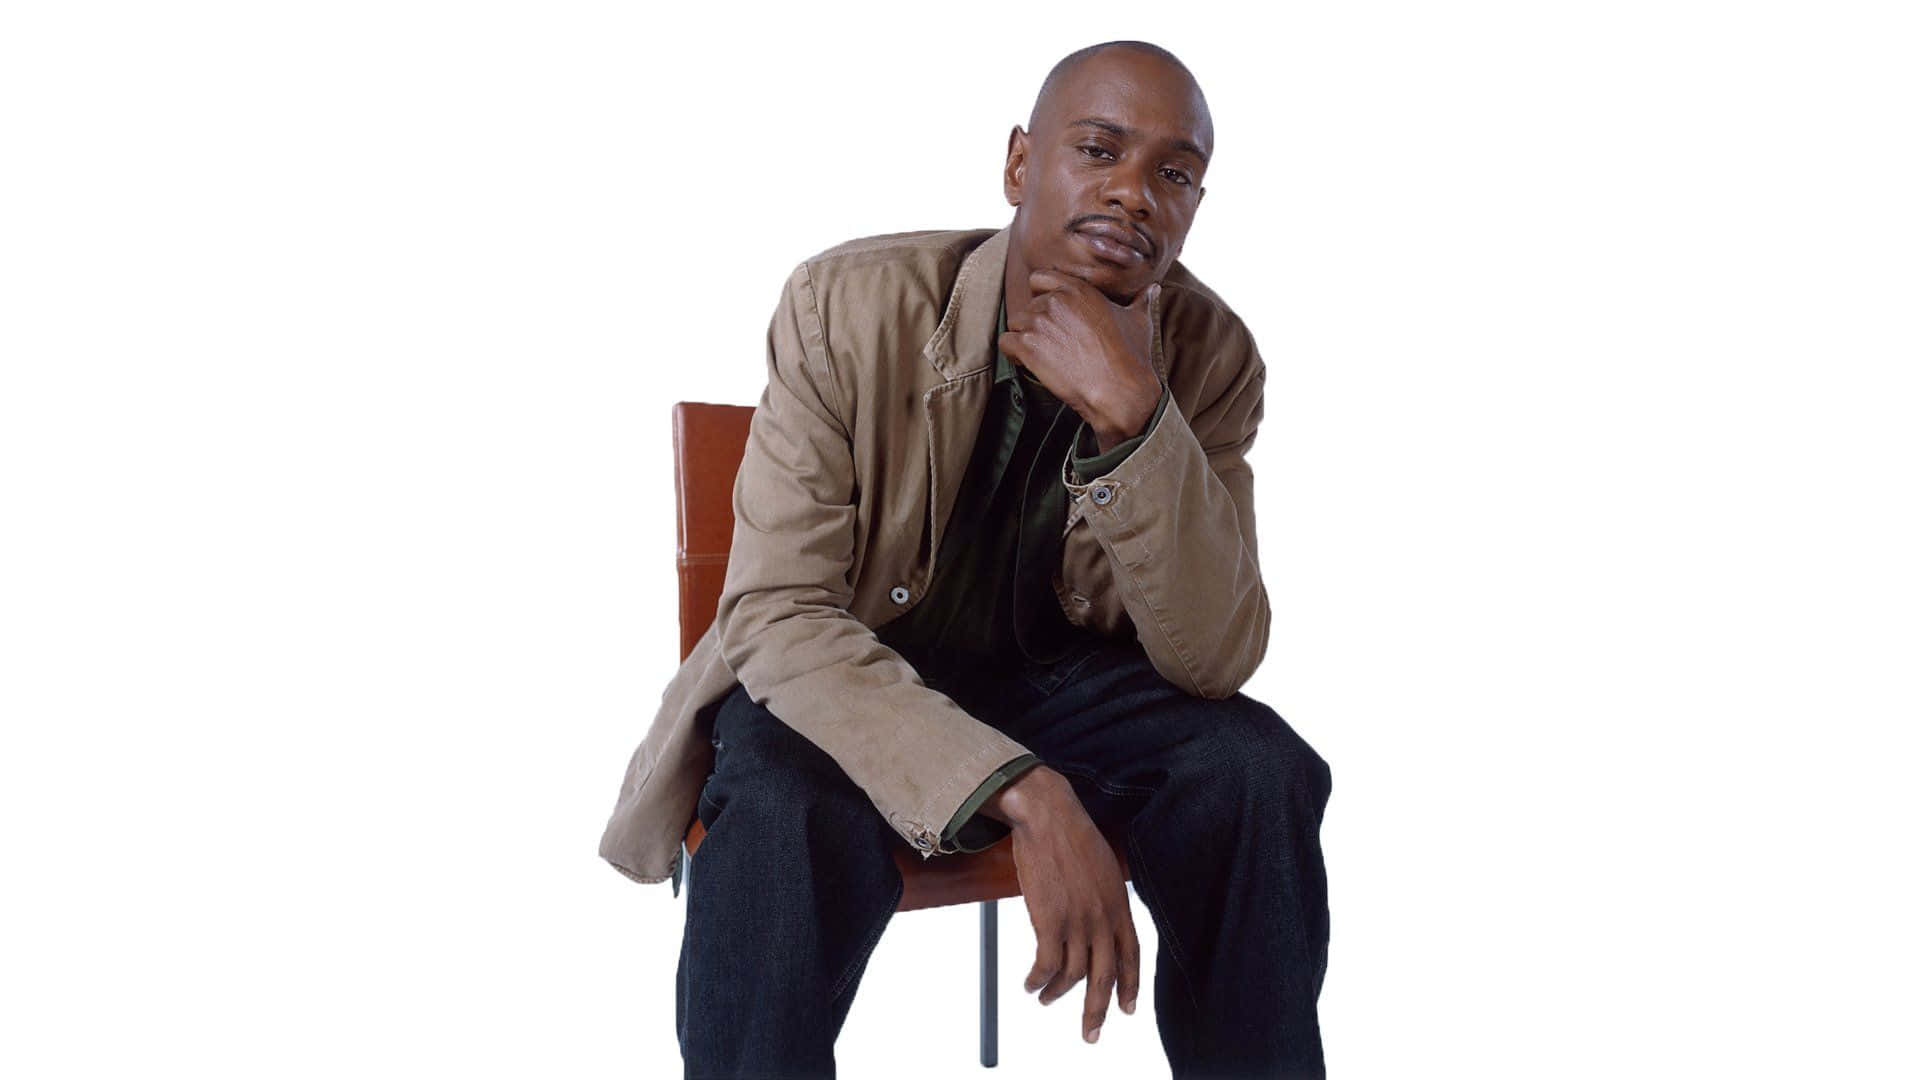 Dave Chappelle Onstage Delivering An Impactful Comedy Performance Wallpaper